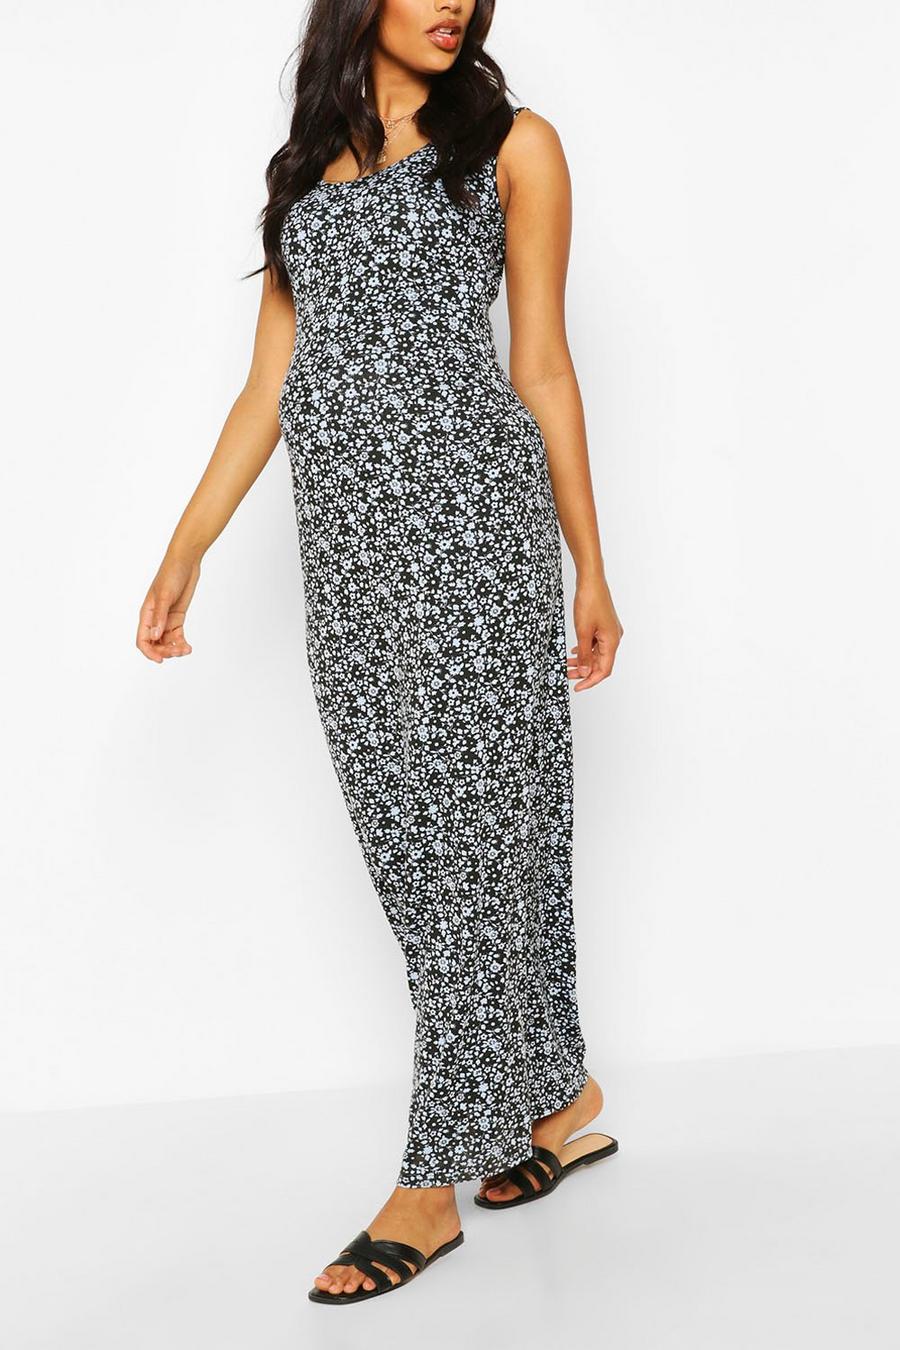 Sky Maternity Ditsy Floral Scoop Neck Maxi Dress image number 1